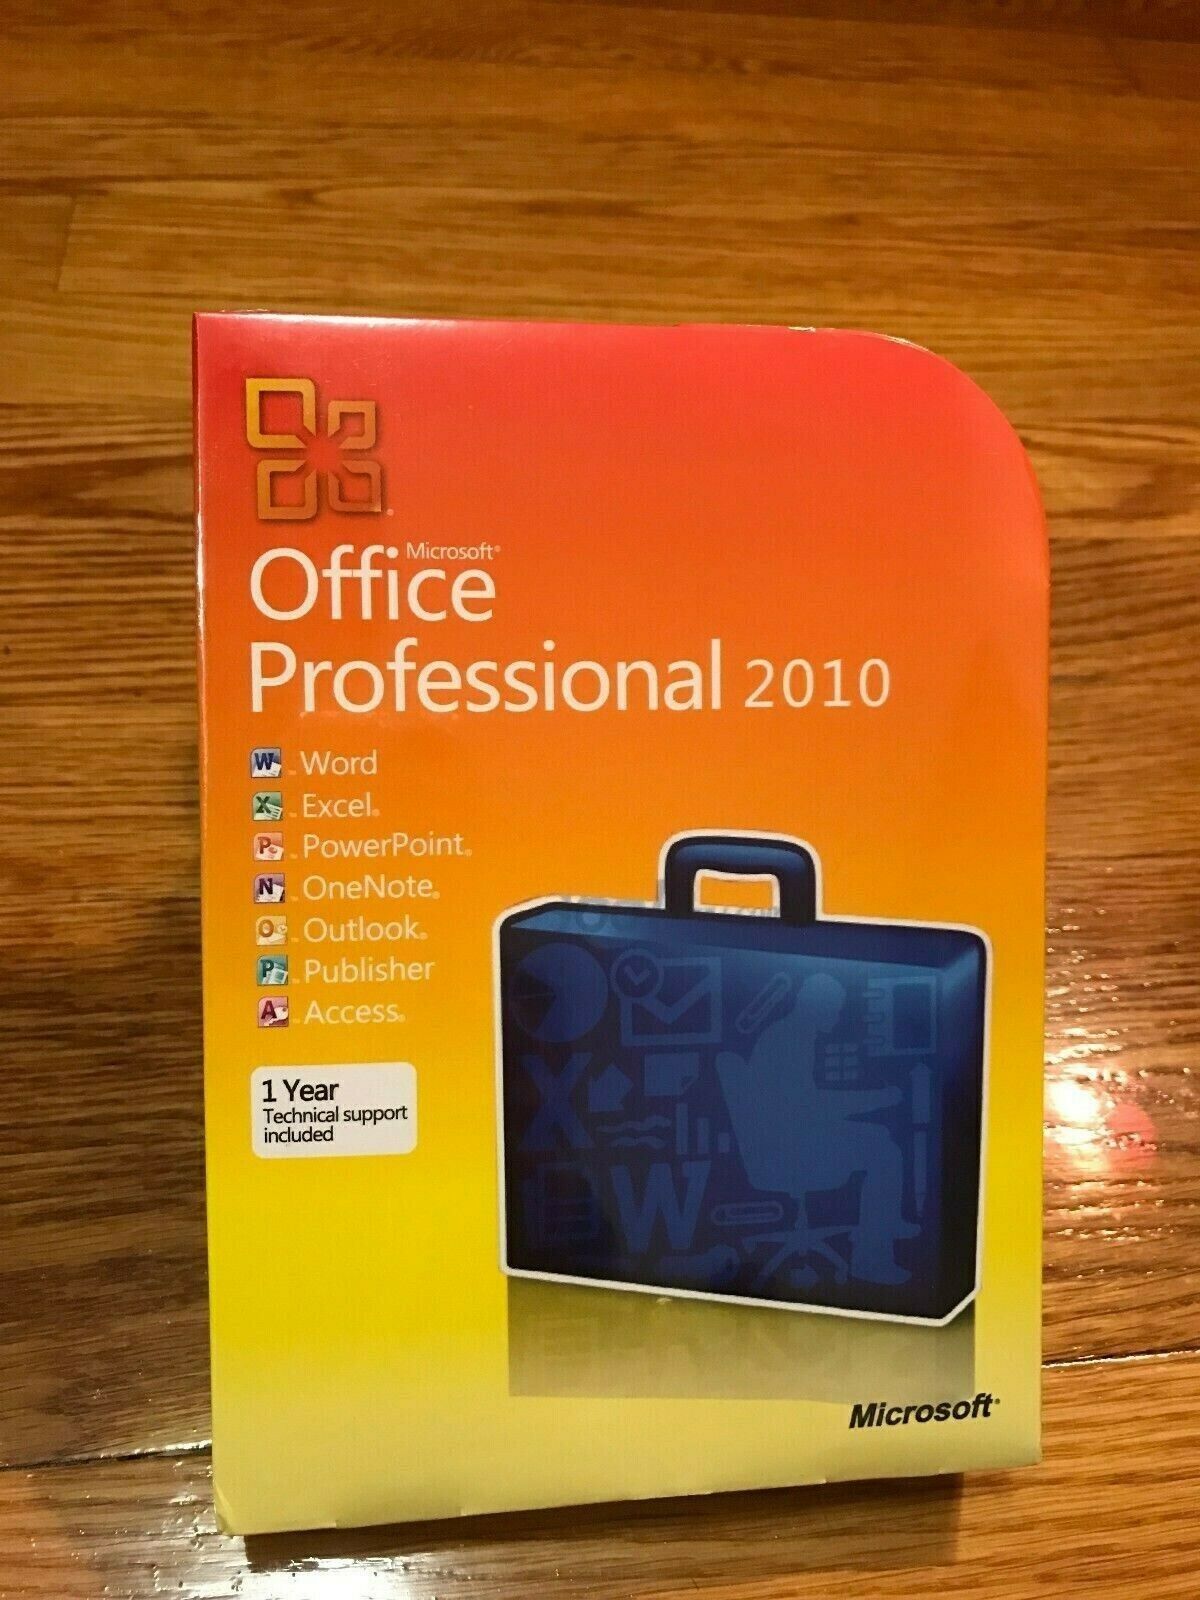 Microsoft Office 2010 Professional For 3 PCs Full Retail NEW SEALED Box Version